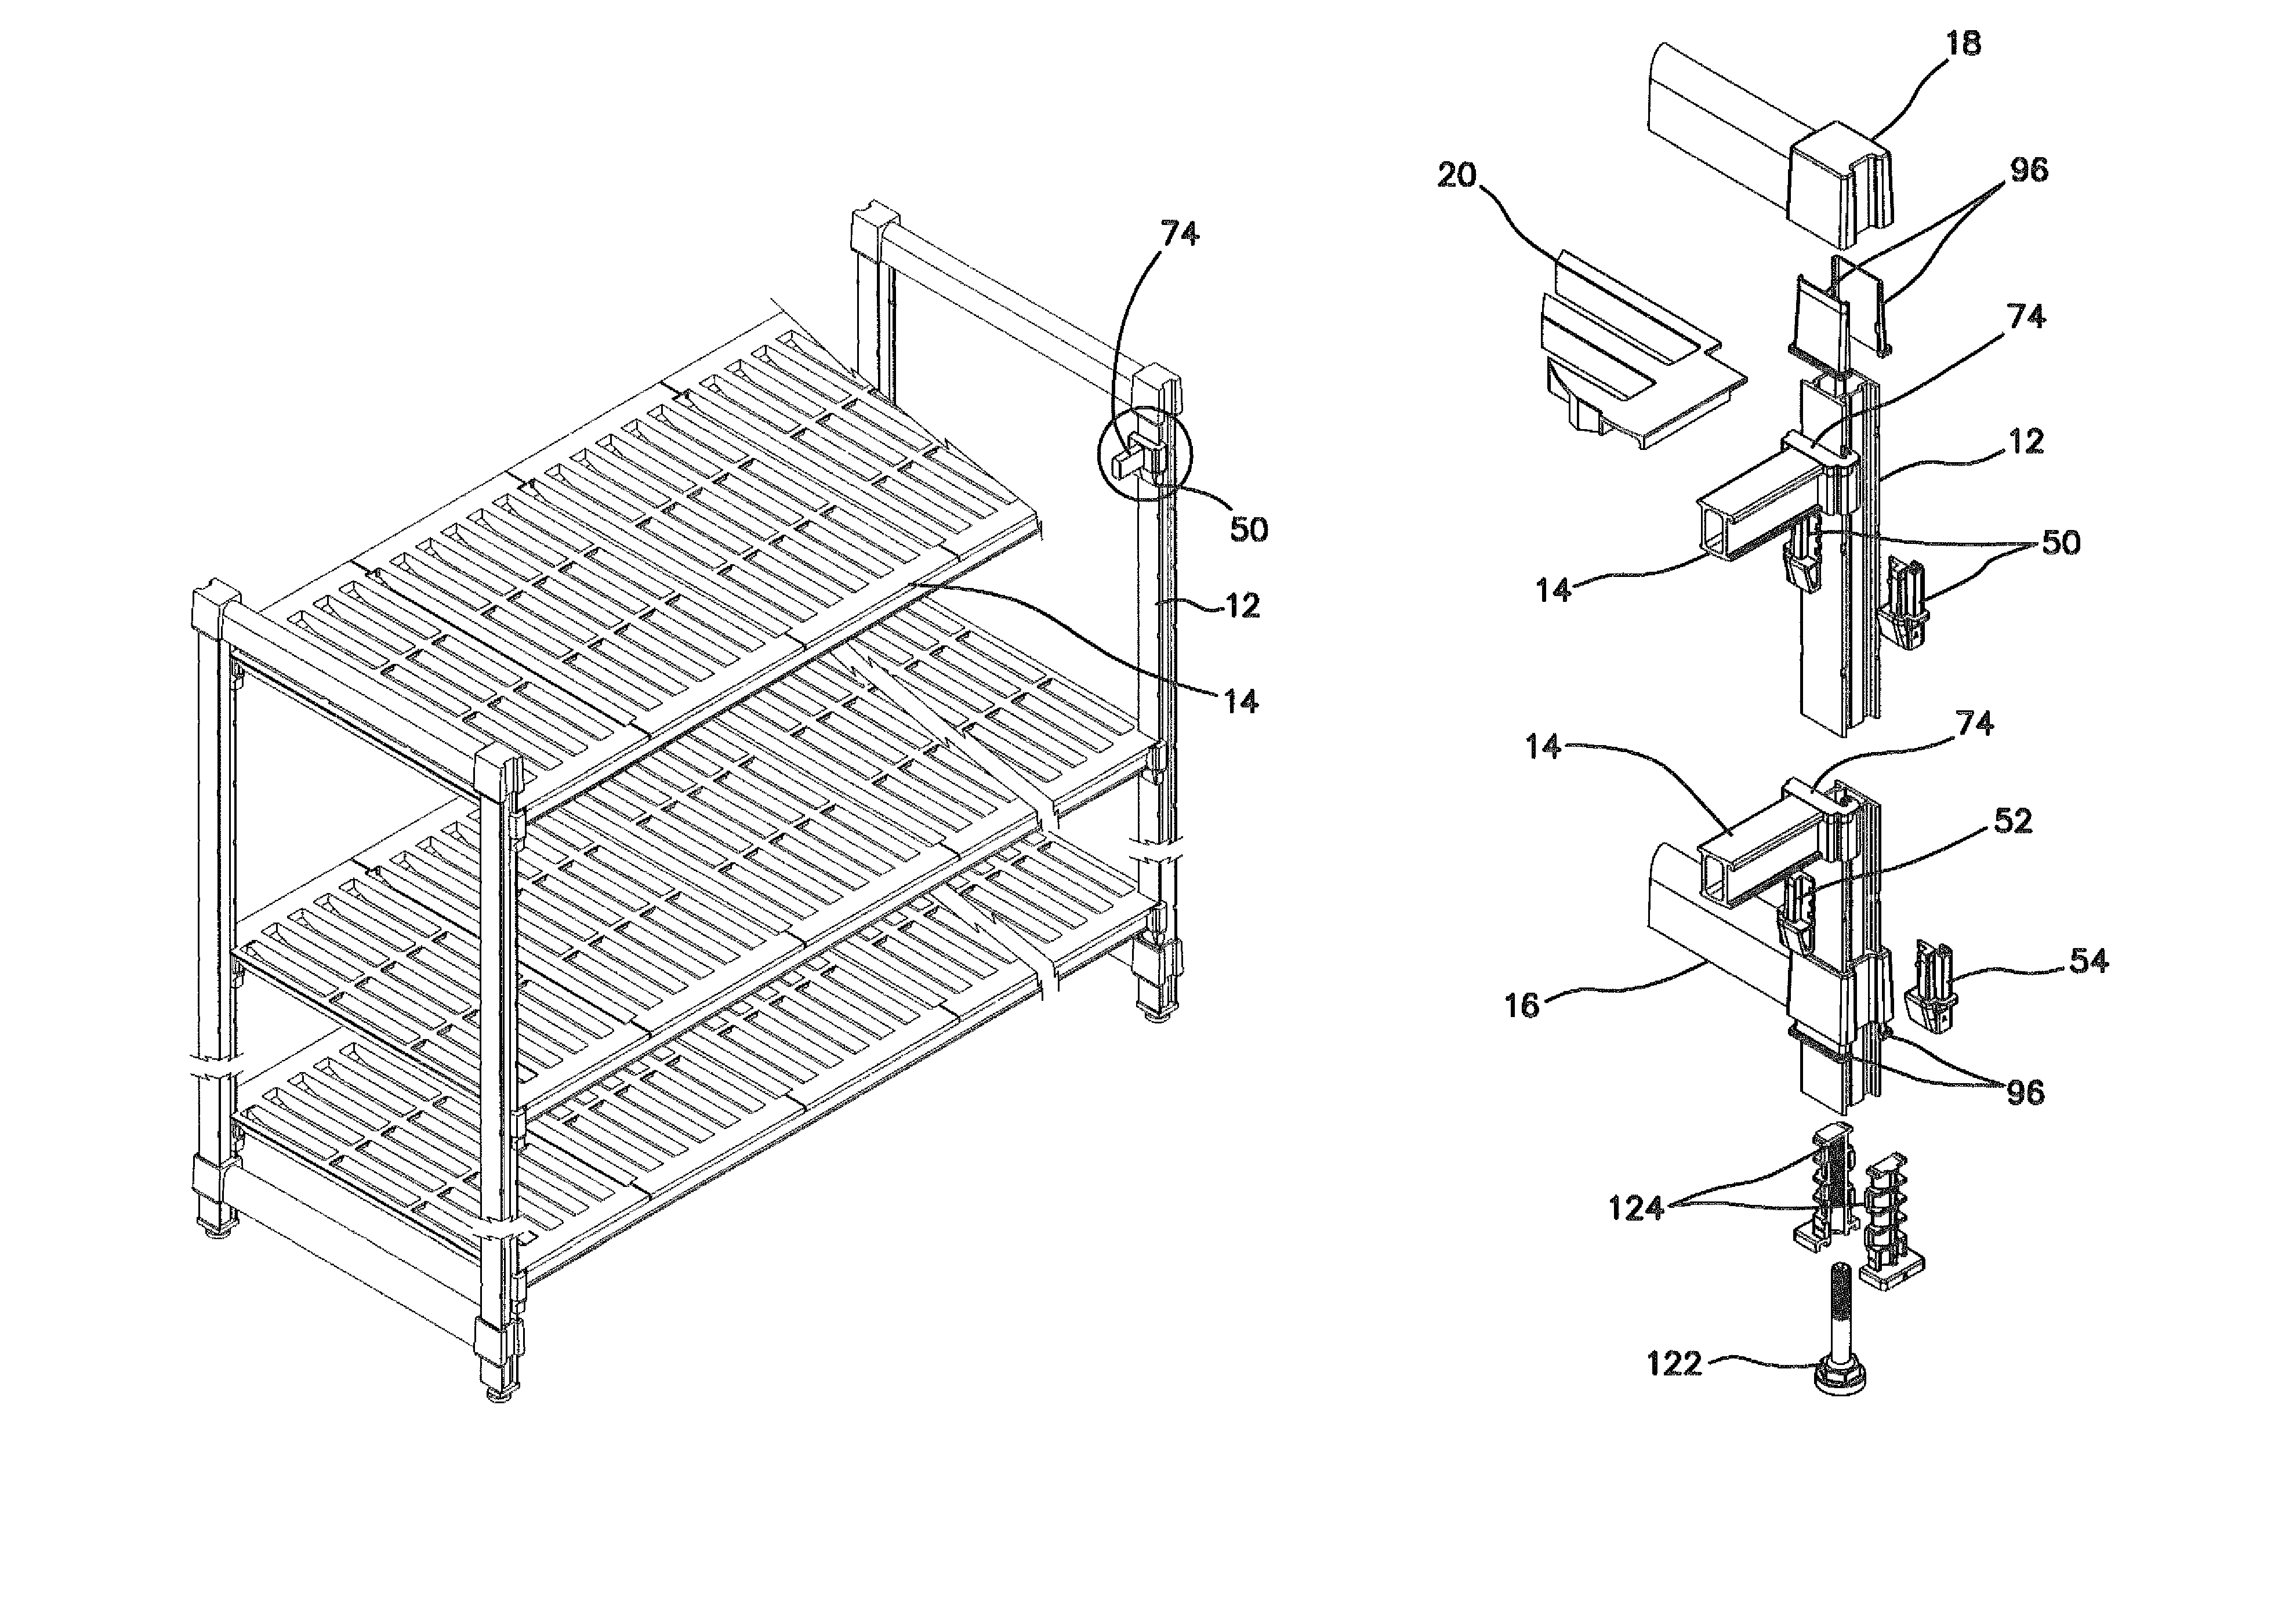 Scalable shelving system